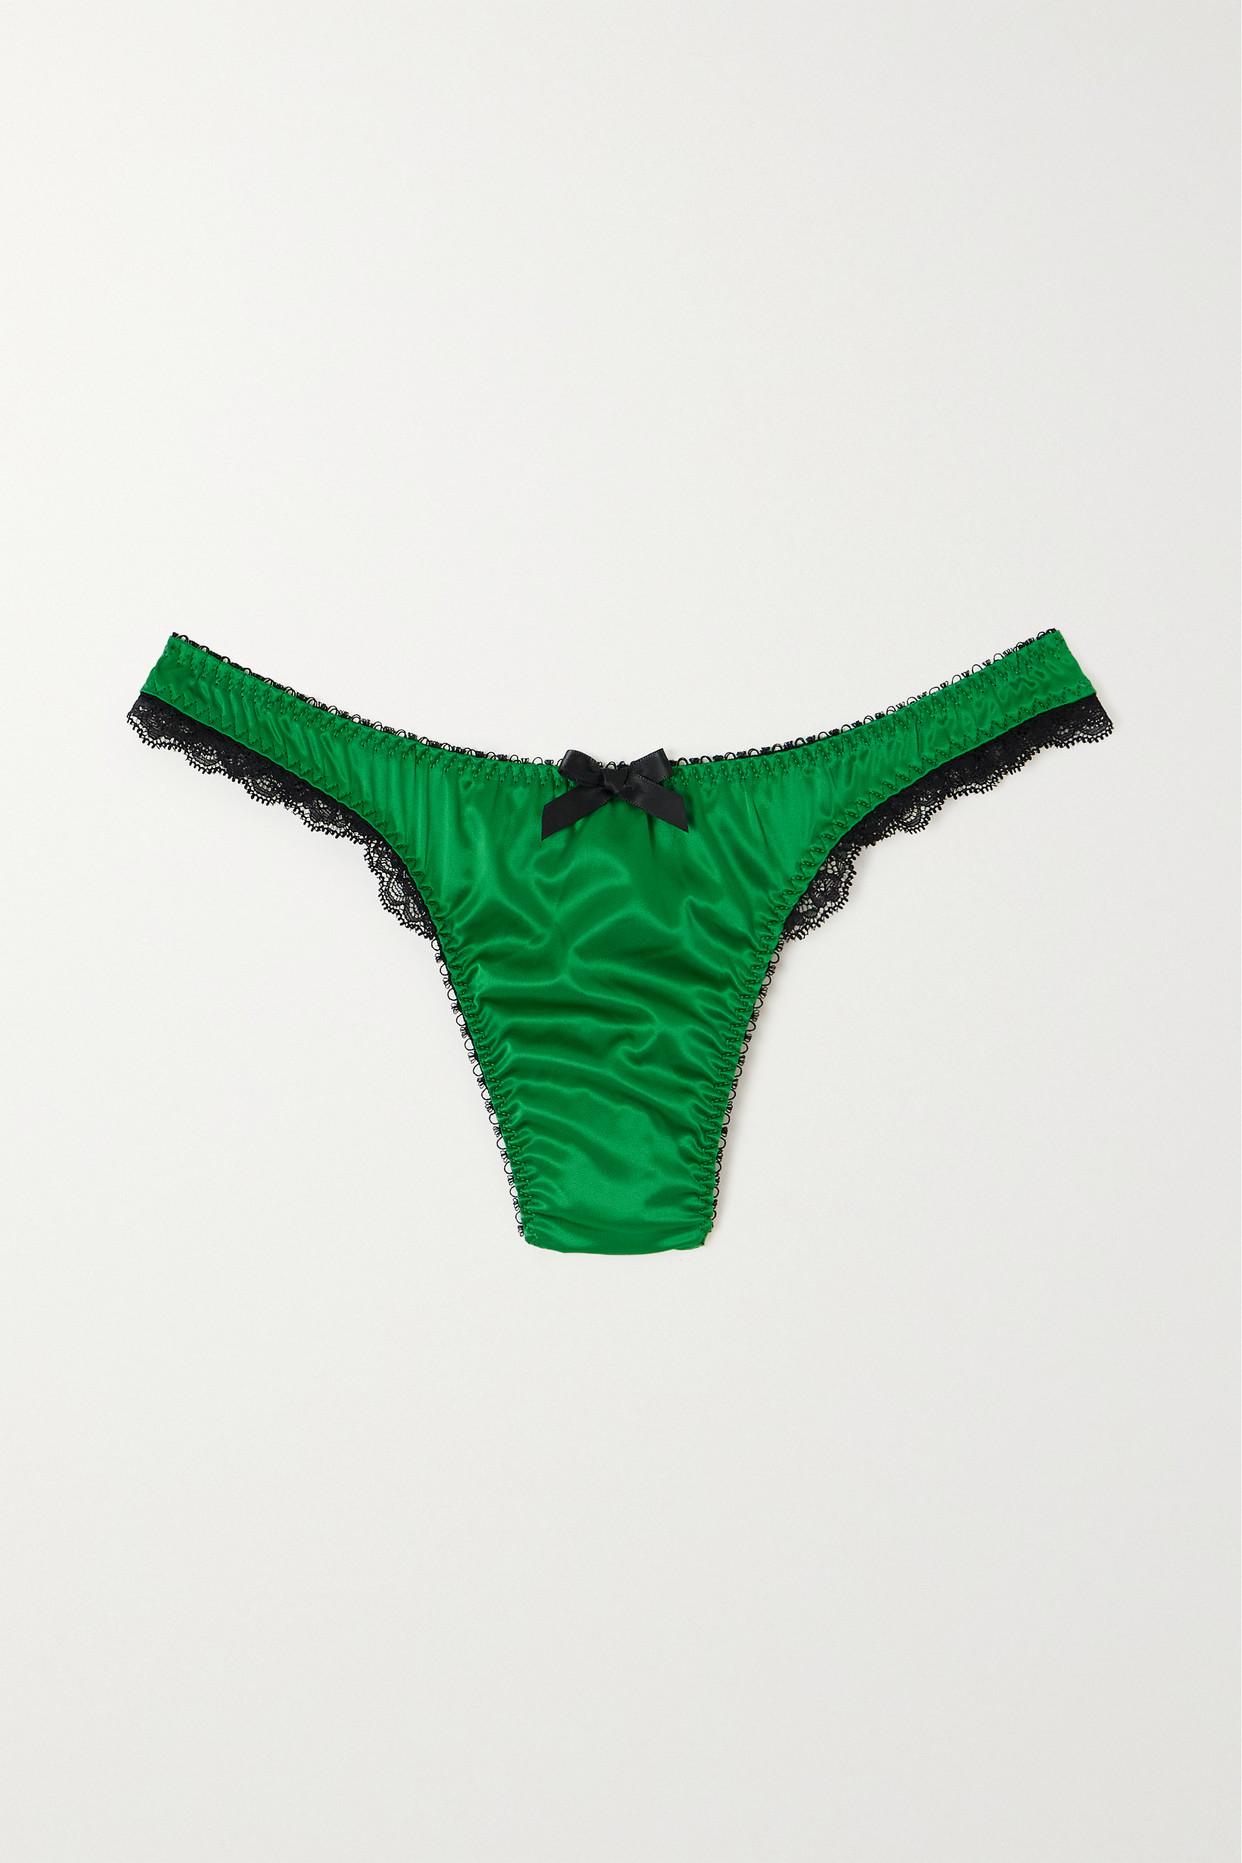 Agent Provocateur Sloane Lace-trimmed Satin Thong in Green